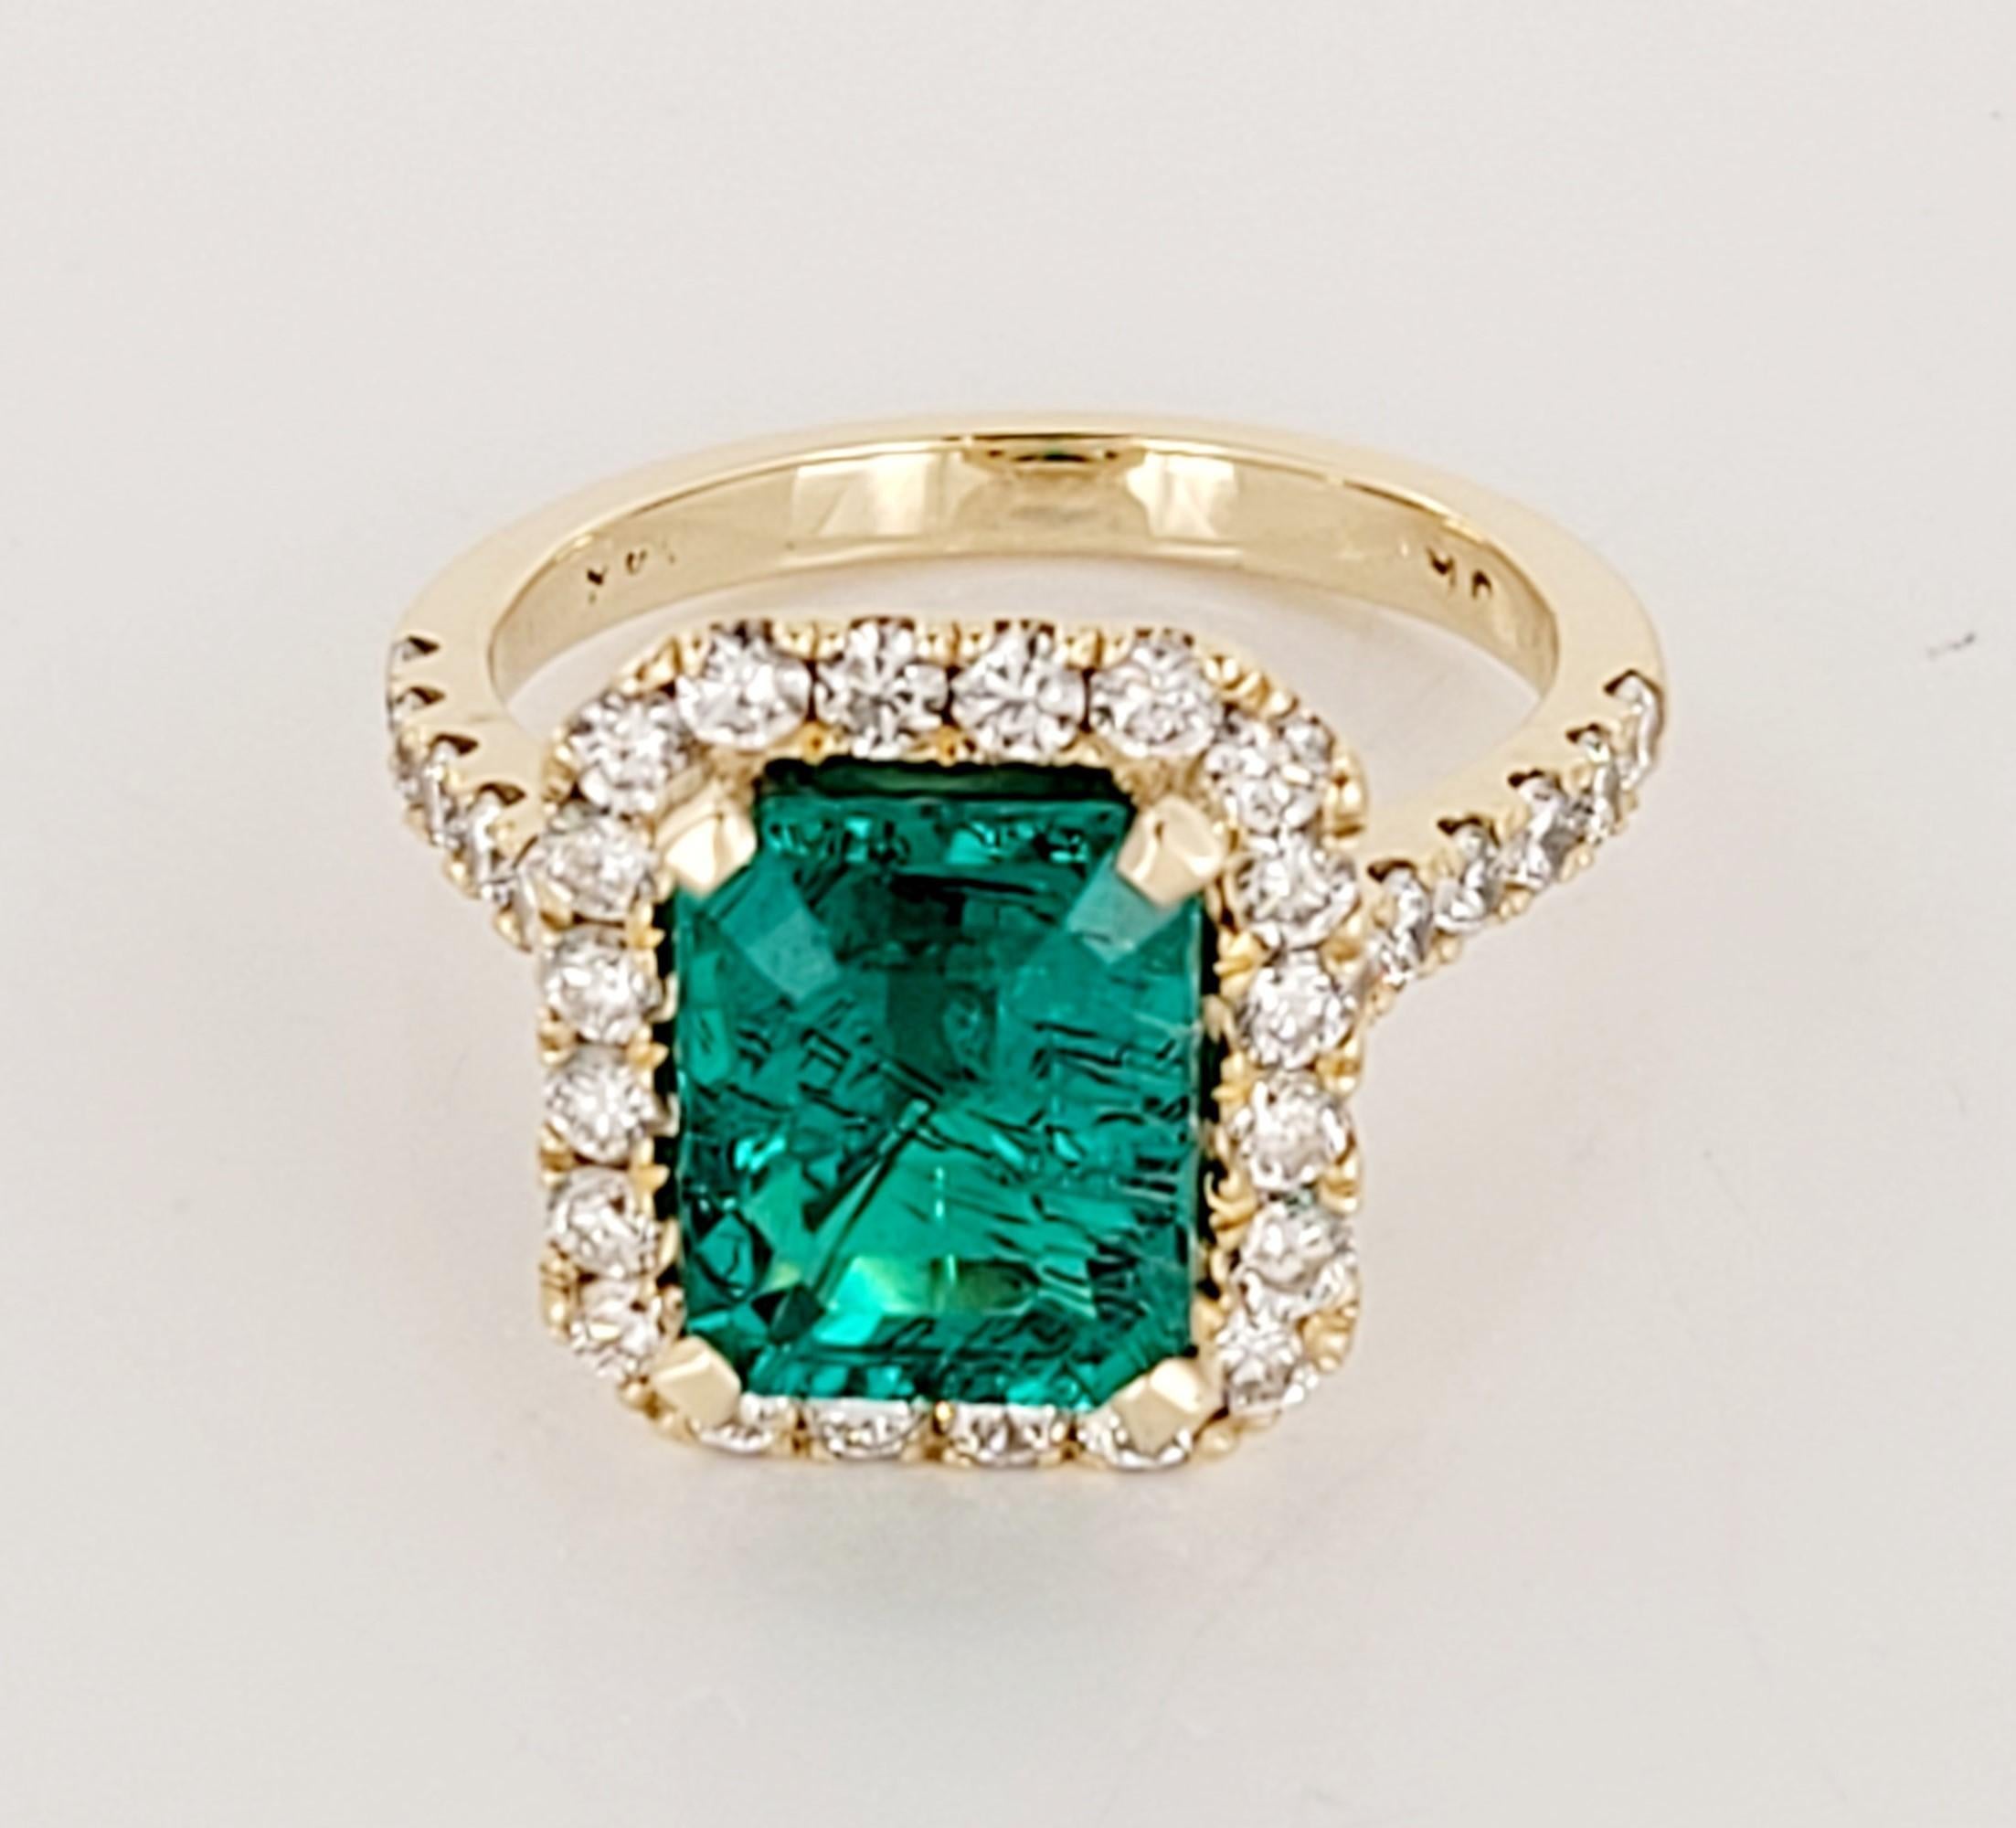 4.75 carat Columbian Emerald (Diffused). Diamond white 1.25 carats in total, Approximately G color and VS clarity.  Size 7

Type: Artisan
Color: Green, Yellow
Stone cut: Emerald Cut
Stone: Emerald
Style: Art Nouveau, Late 20th Century
Item